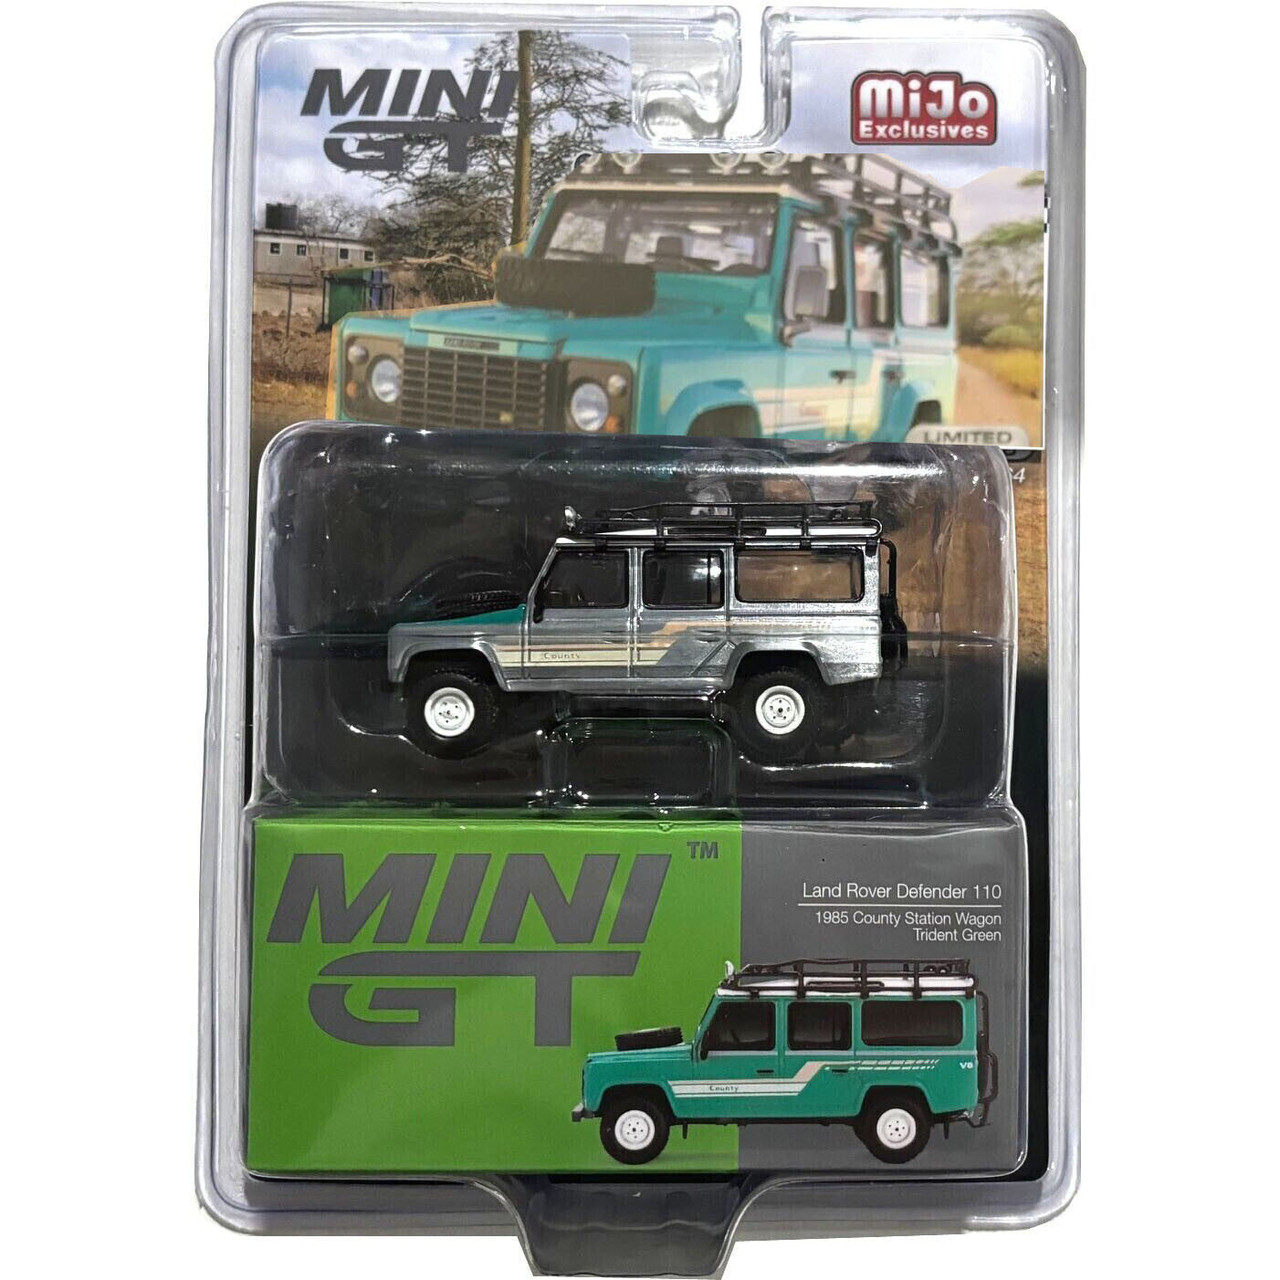 CHASE CAR 1/64 Mini GT 1985 Land Rover Defender 110 County Station Wagon Trident Green Diecast Car Model